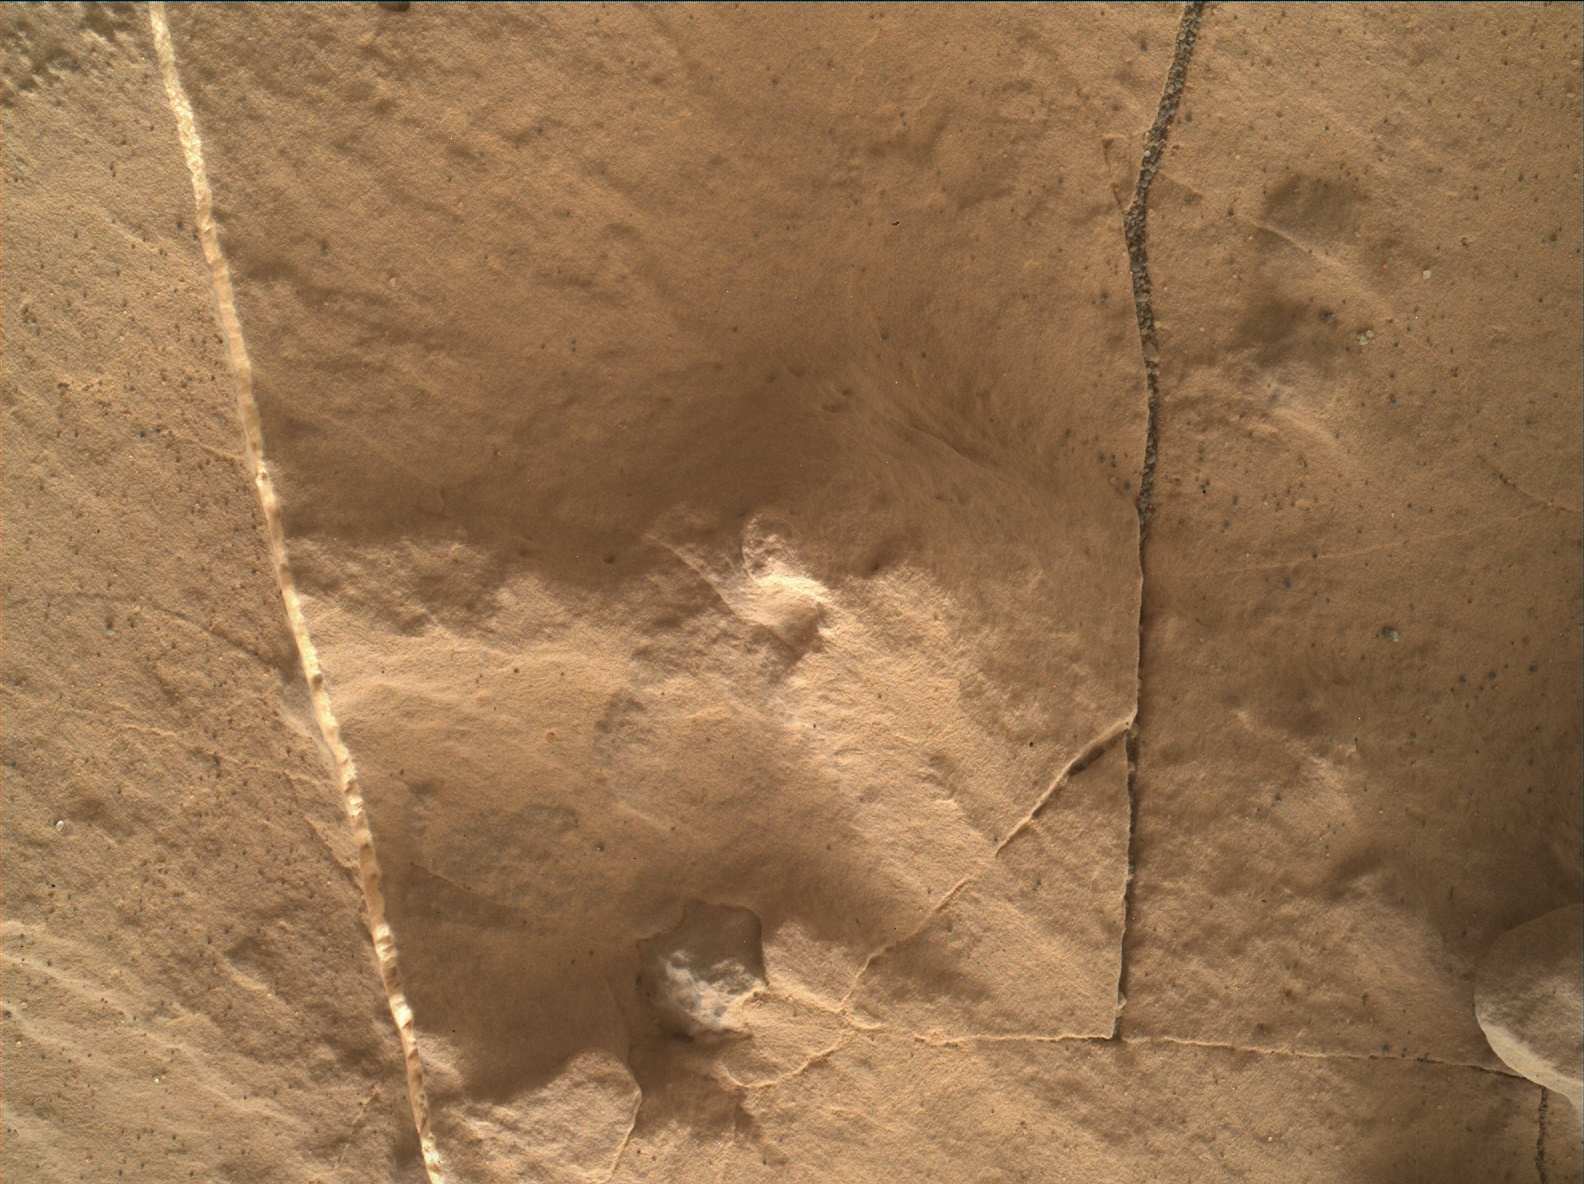 Nasa's Mars rover Curiosity acquired this image using its Mars Hand Lens Imager (MAHLI) on Sol 2050